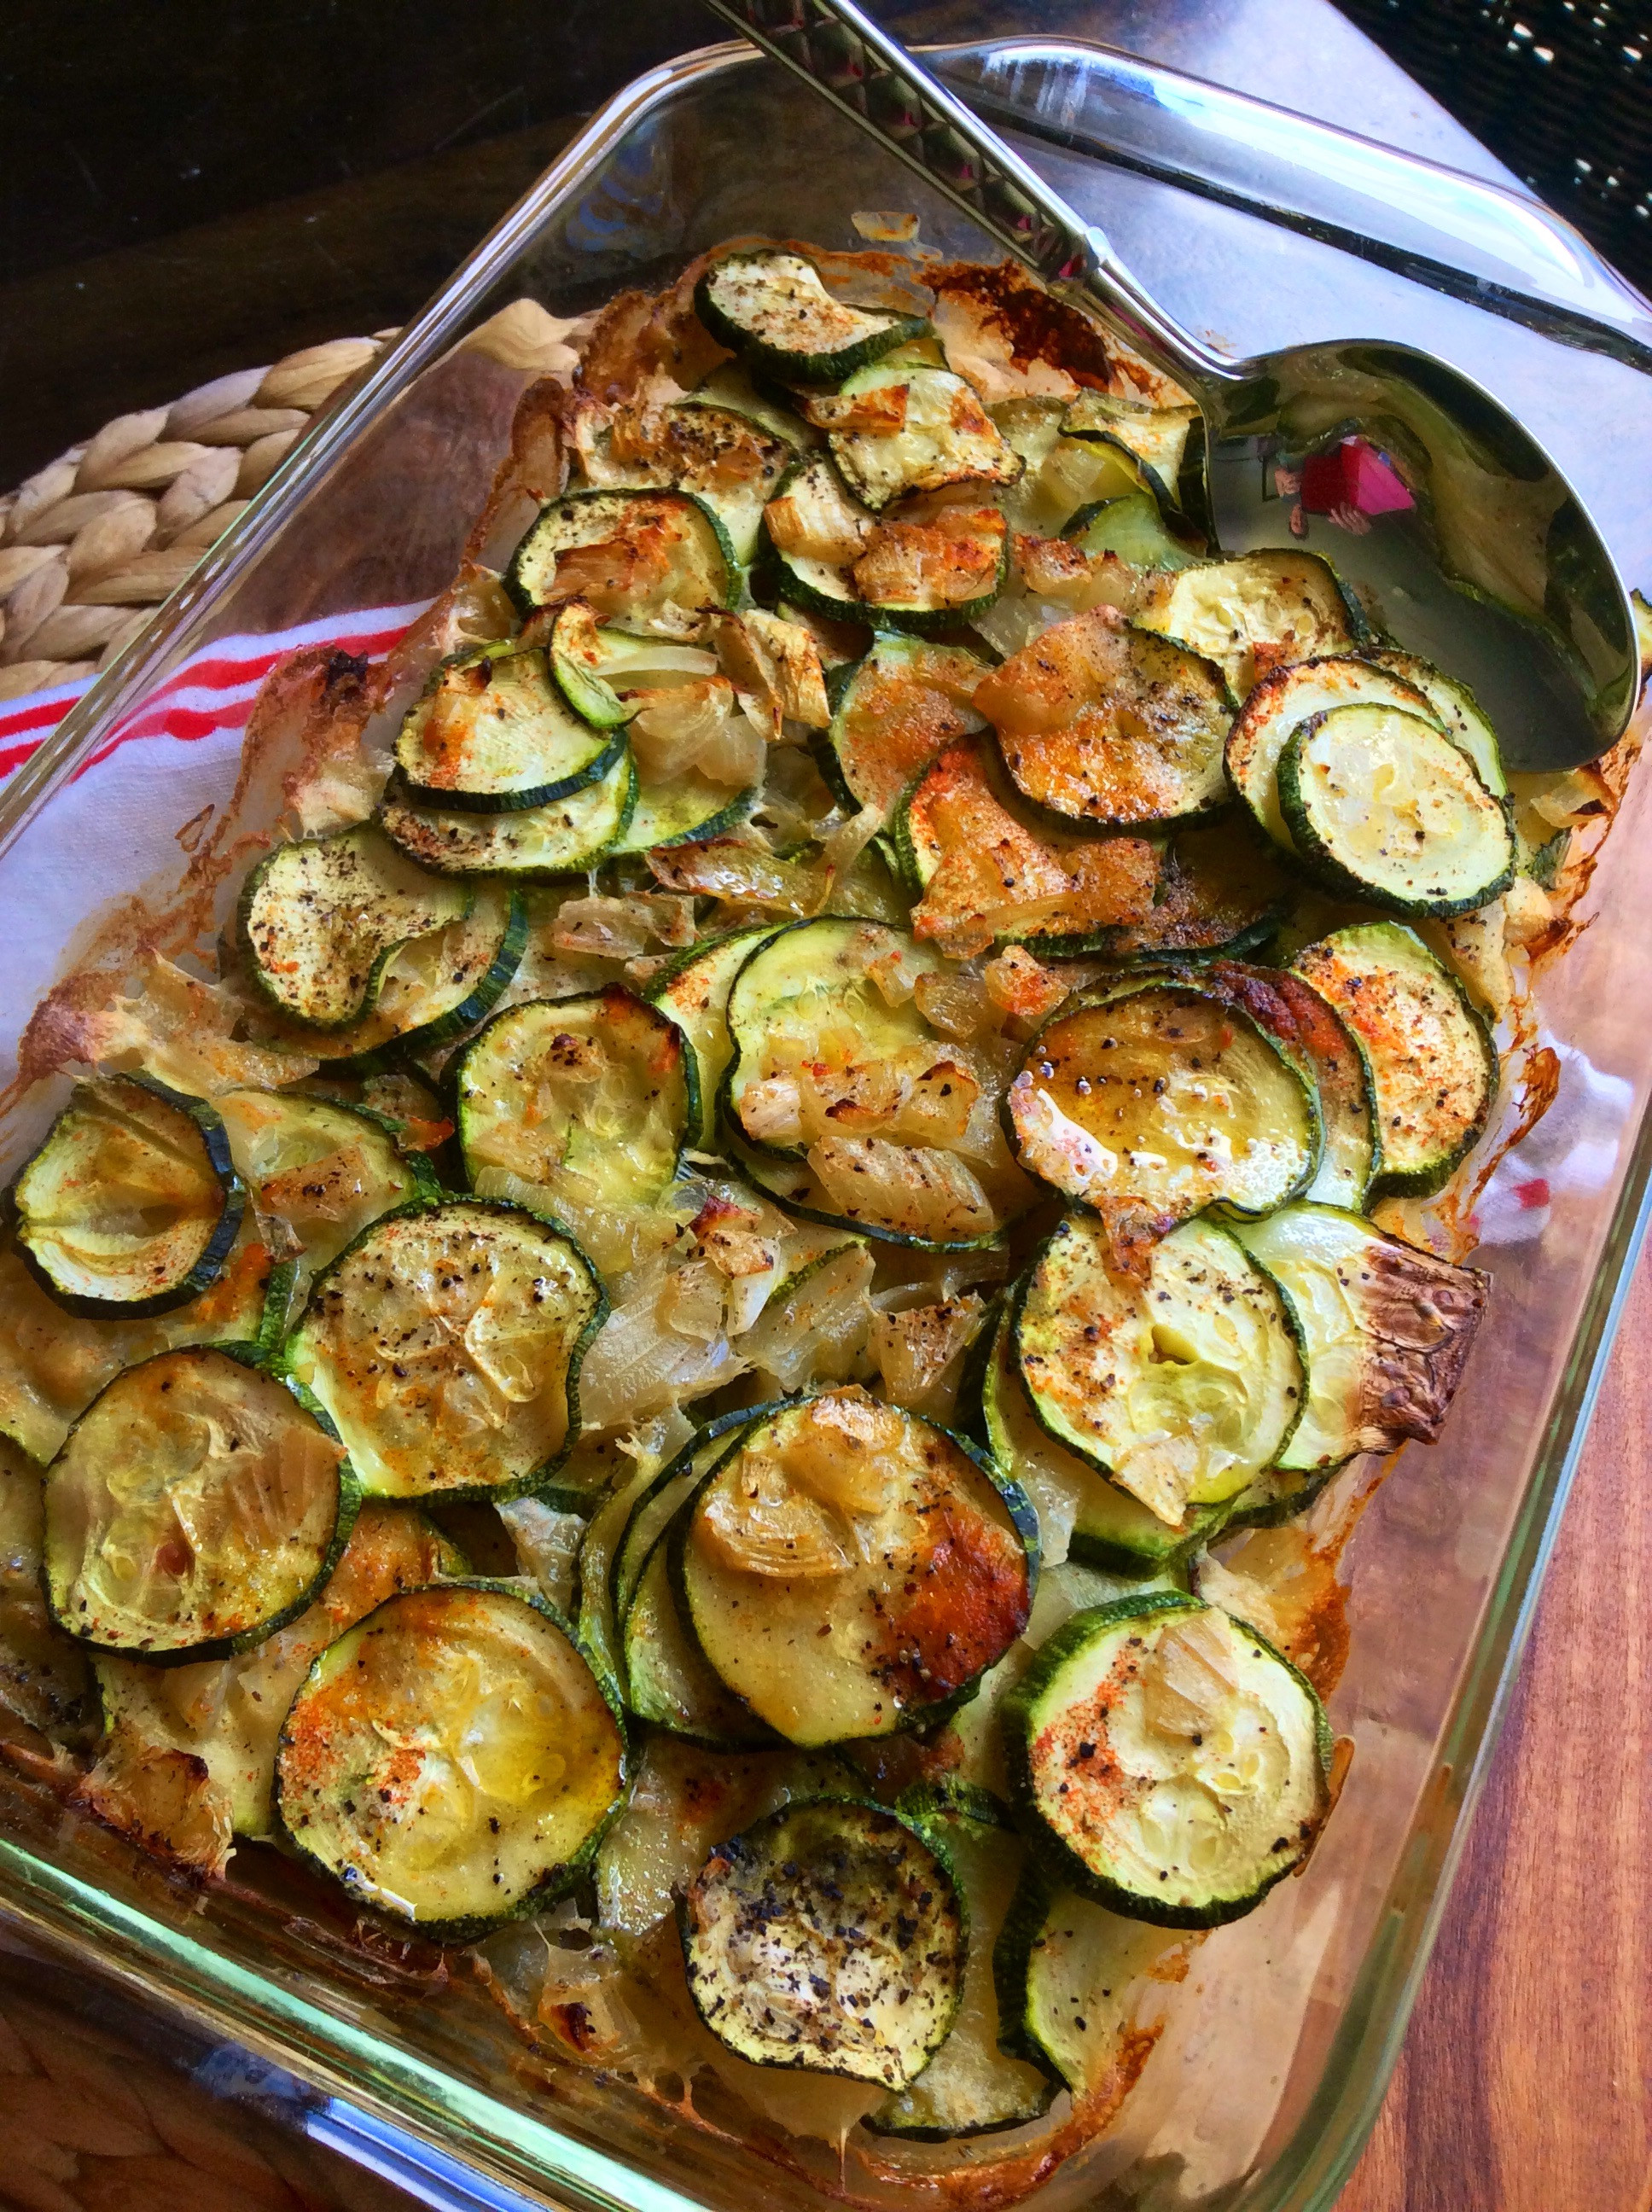 Quick Side Dishes
 Quick scalloped zucchini bake A good side dish for